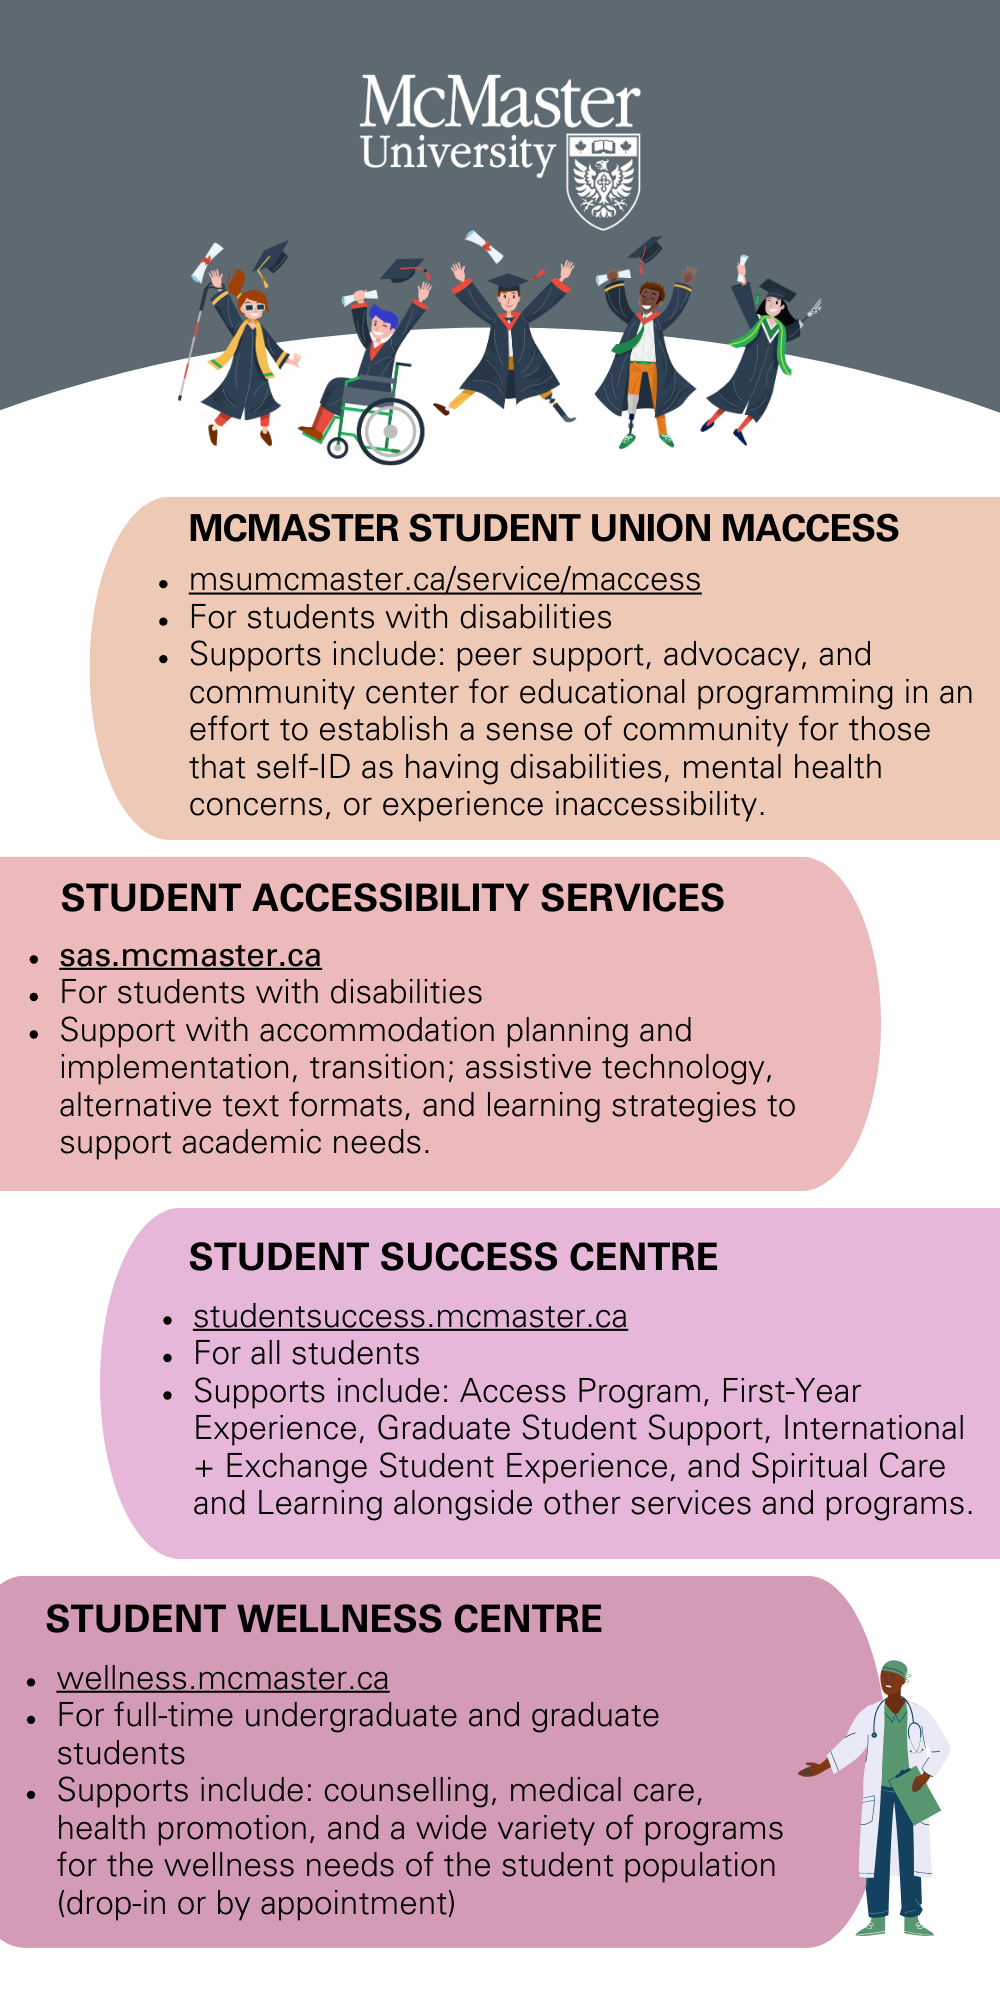 The back of the Accessibility Service Providers Resource Card displays 4 boxes of text explaining the services and supports available from departments including: MSU Maccess; Student Accessibility Services; Student Success Centre; and Student Wellness Centre